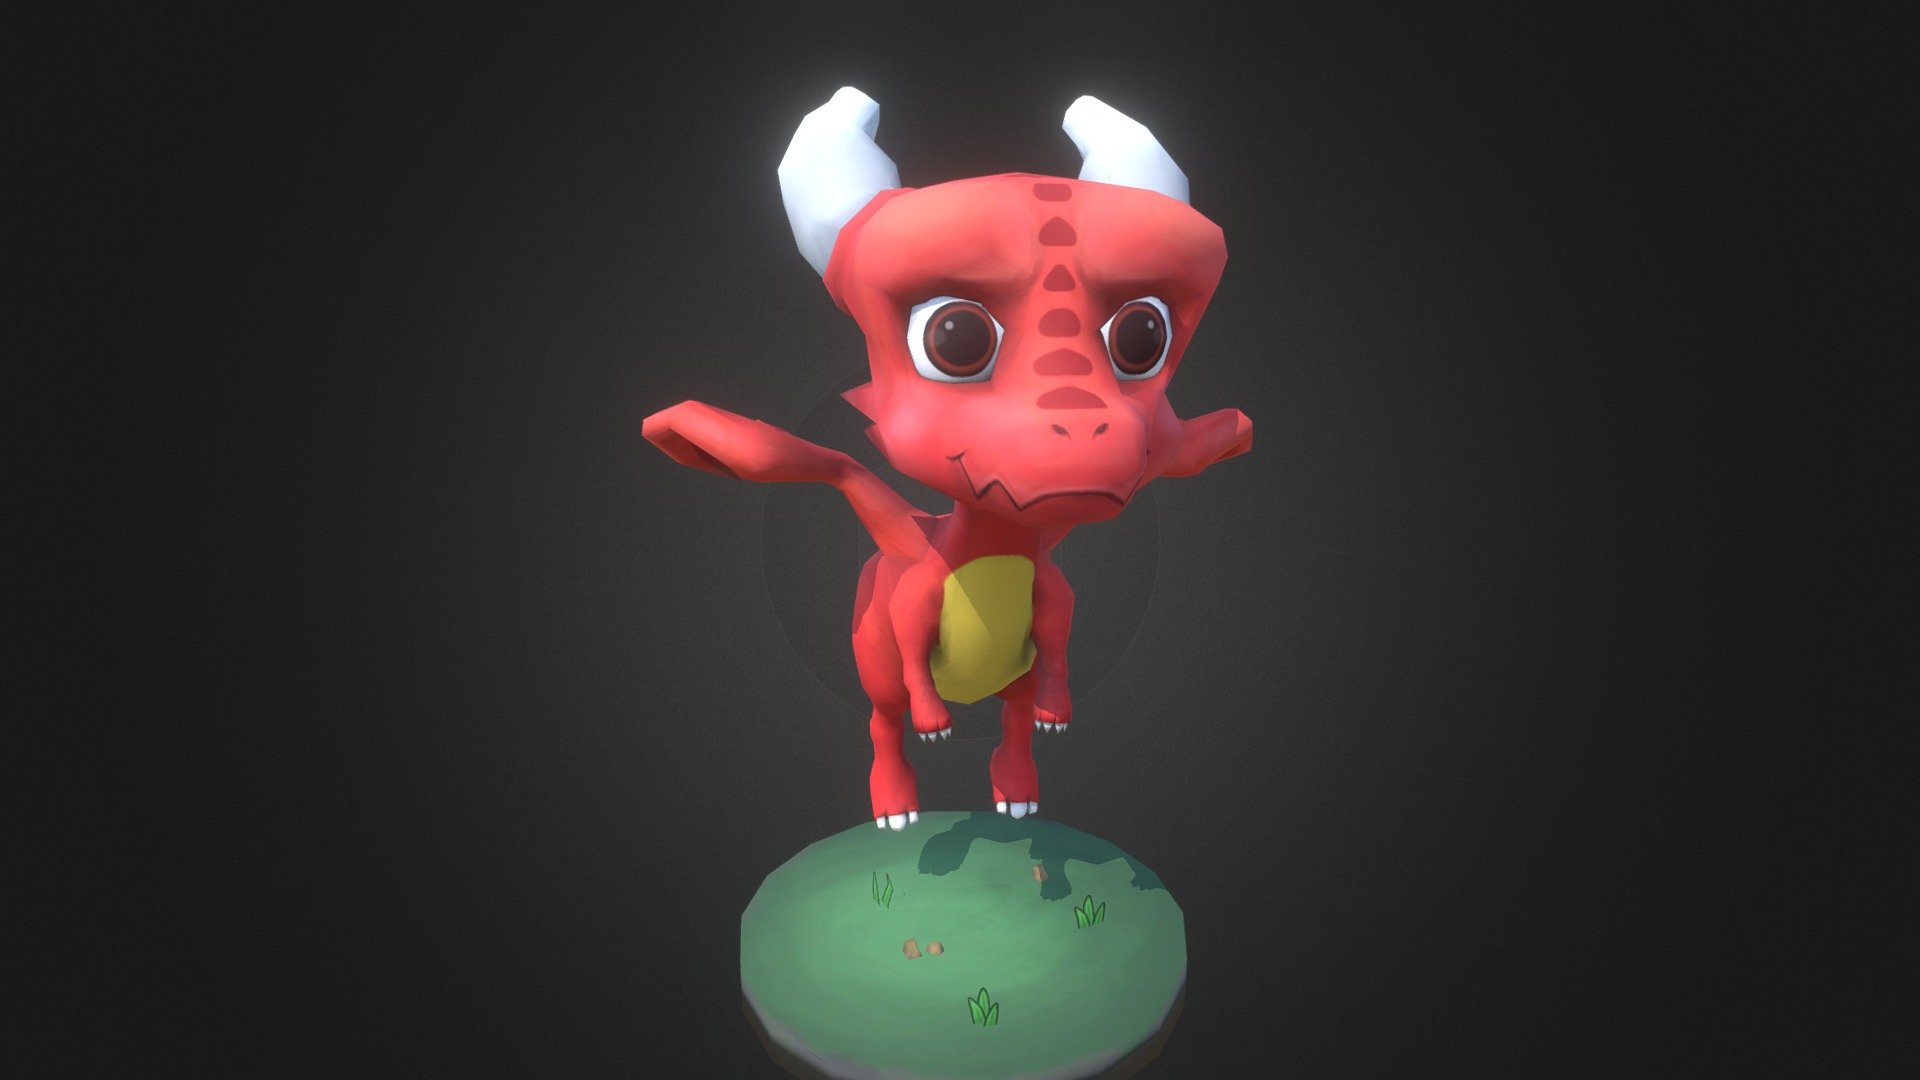 It's a Cartoon dragon, modeled, rigged, and animated with  Blender, and texturized with Blender and the help of phtoshop 3d model